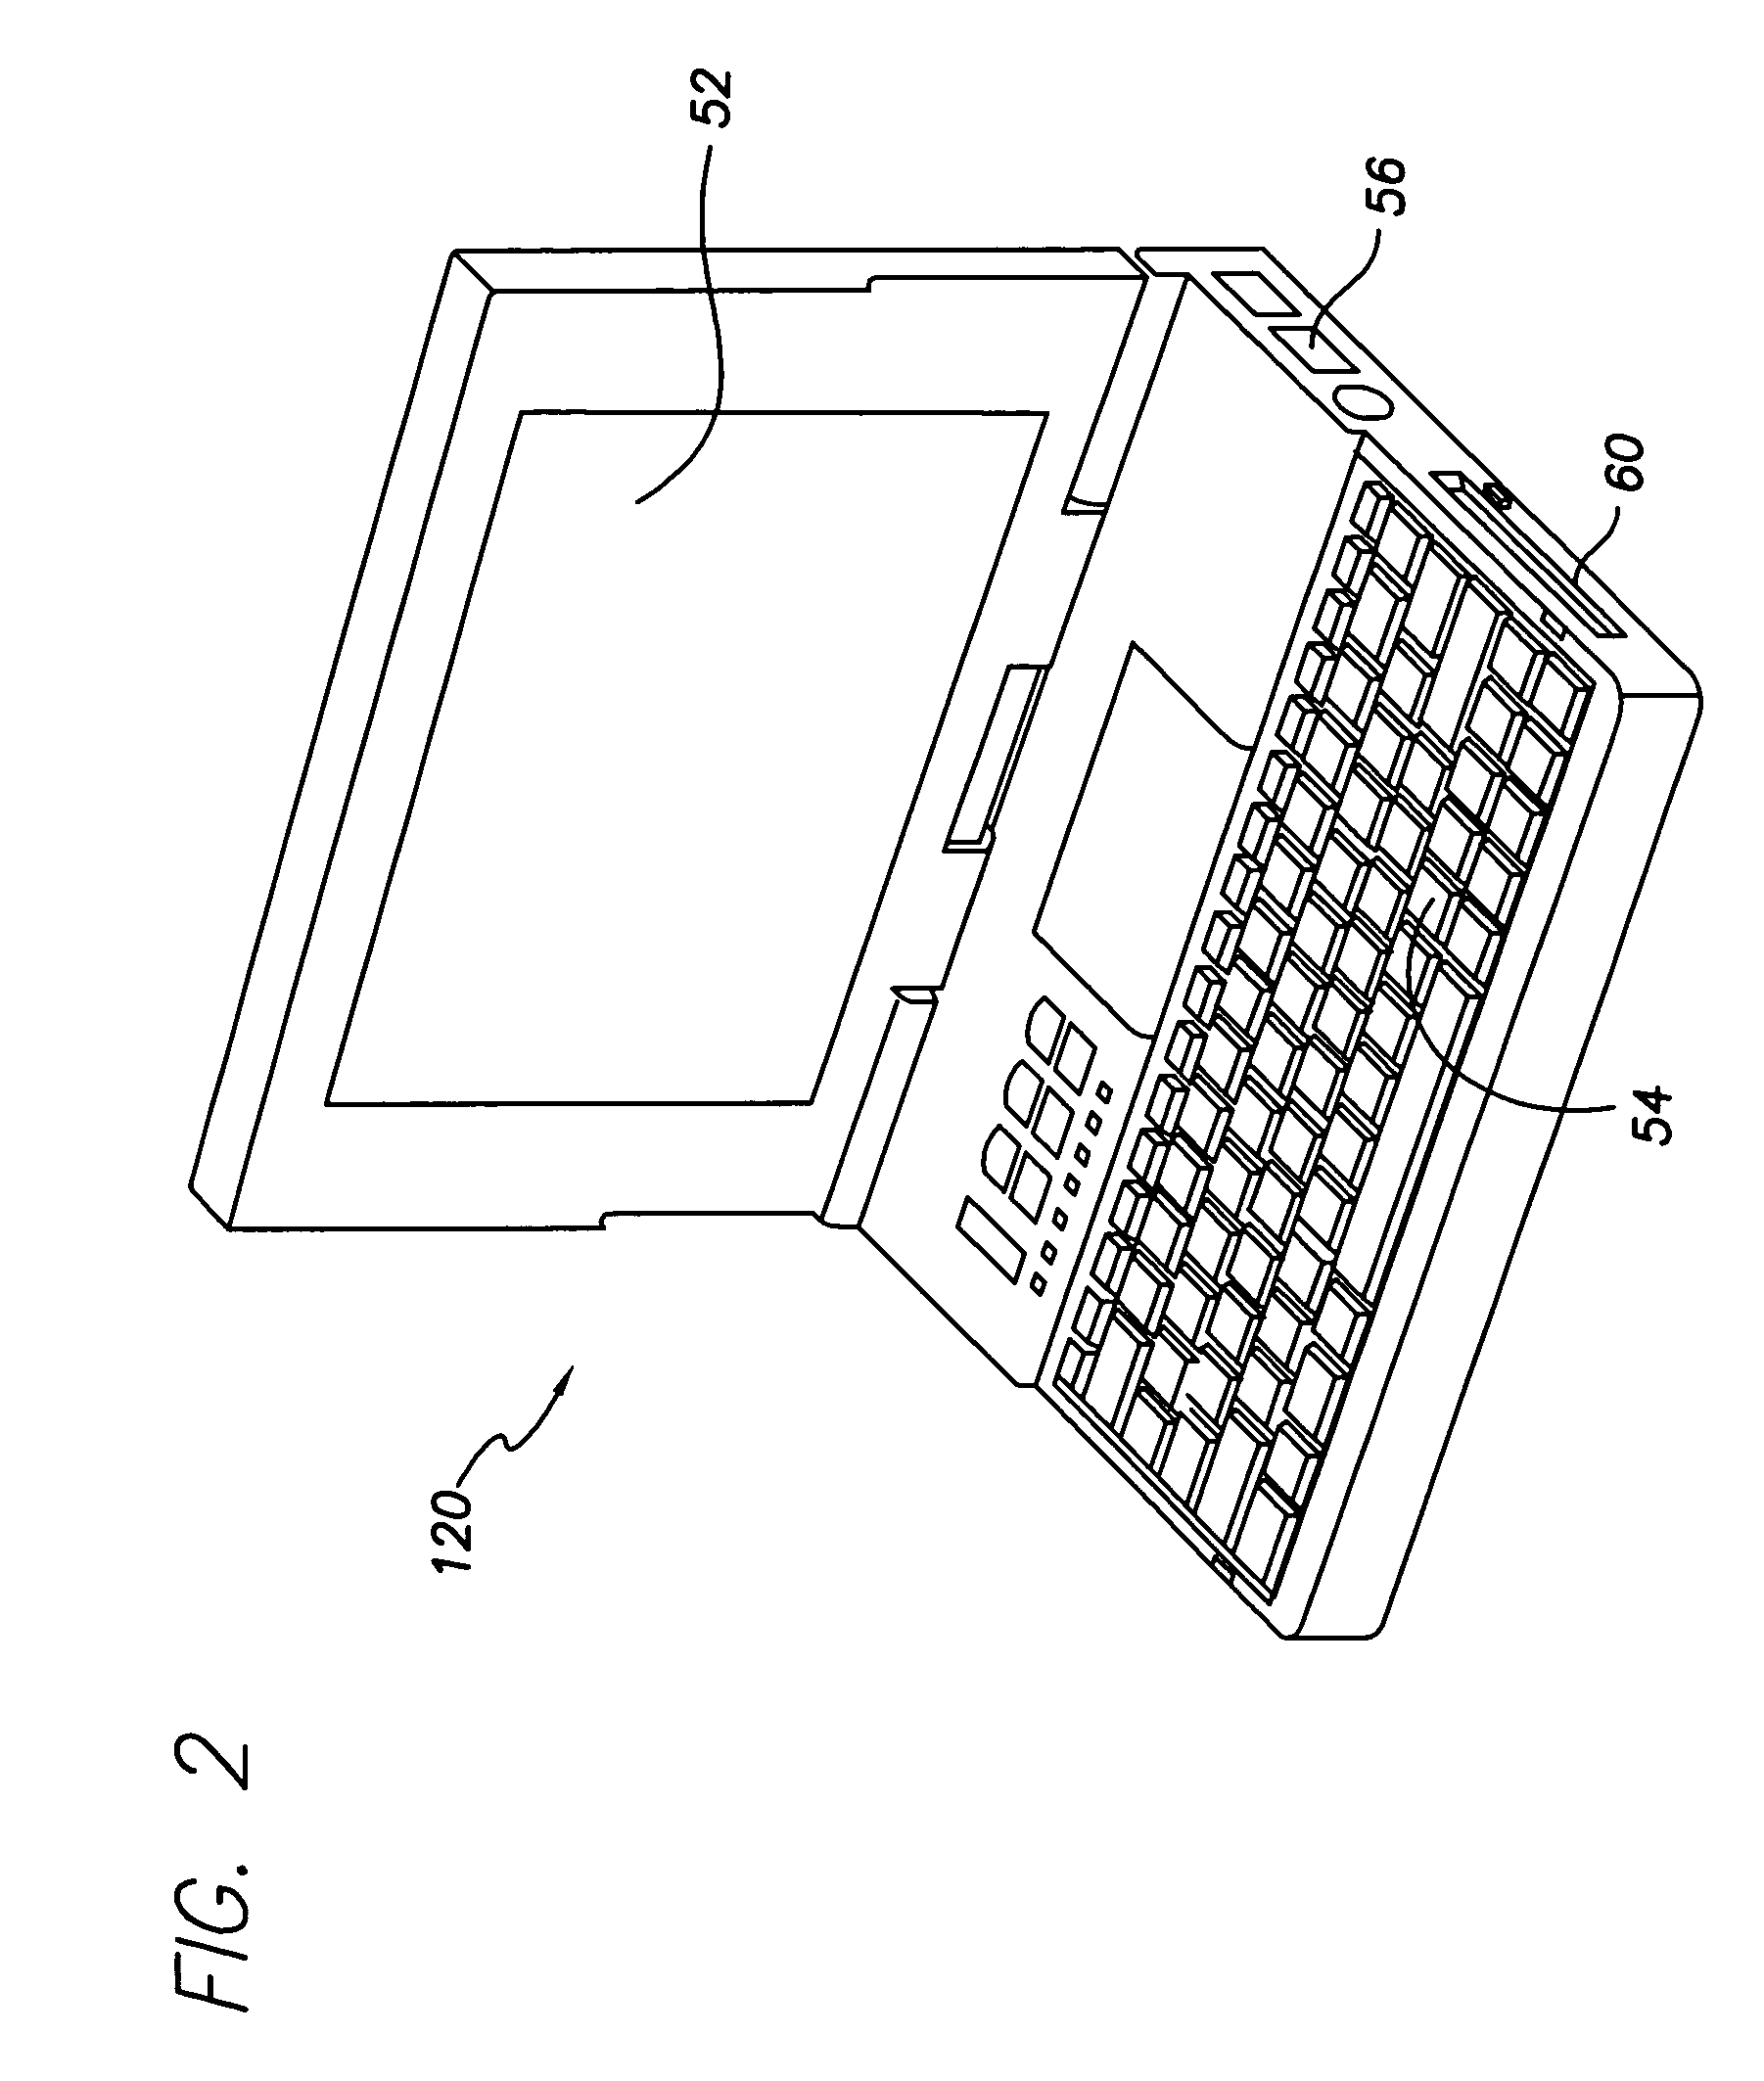 Method and system to graphically display programming parameters for multi-chamber devices